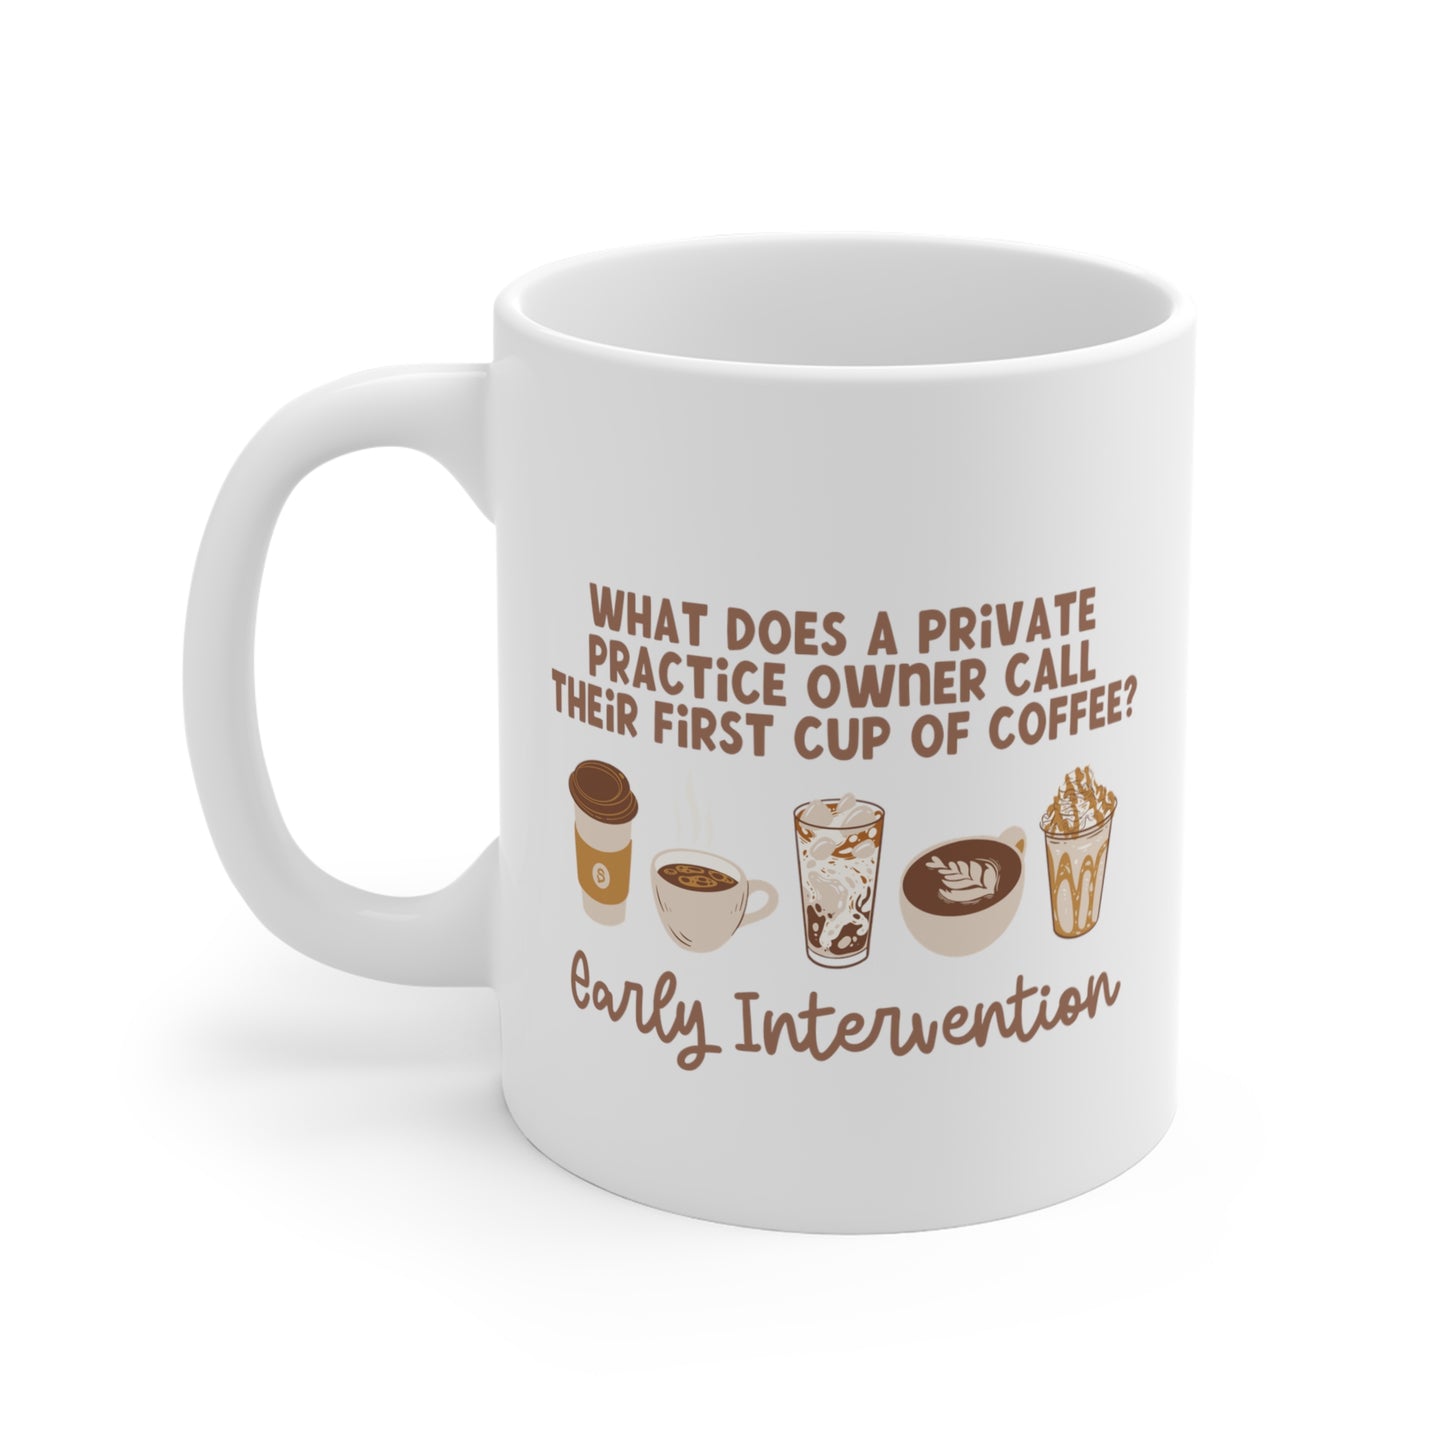 What Does A Private Practice Owner Call Their First Cup of Coffee Mug